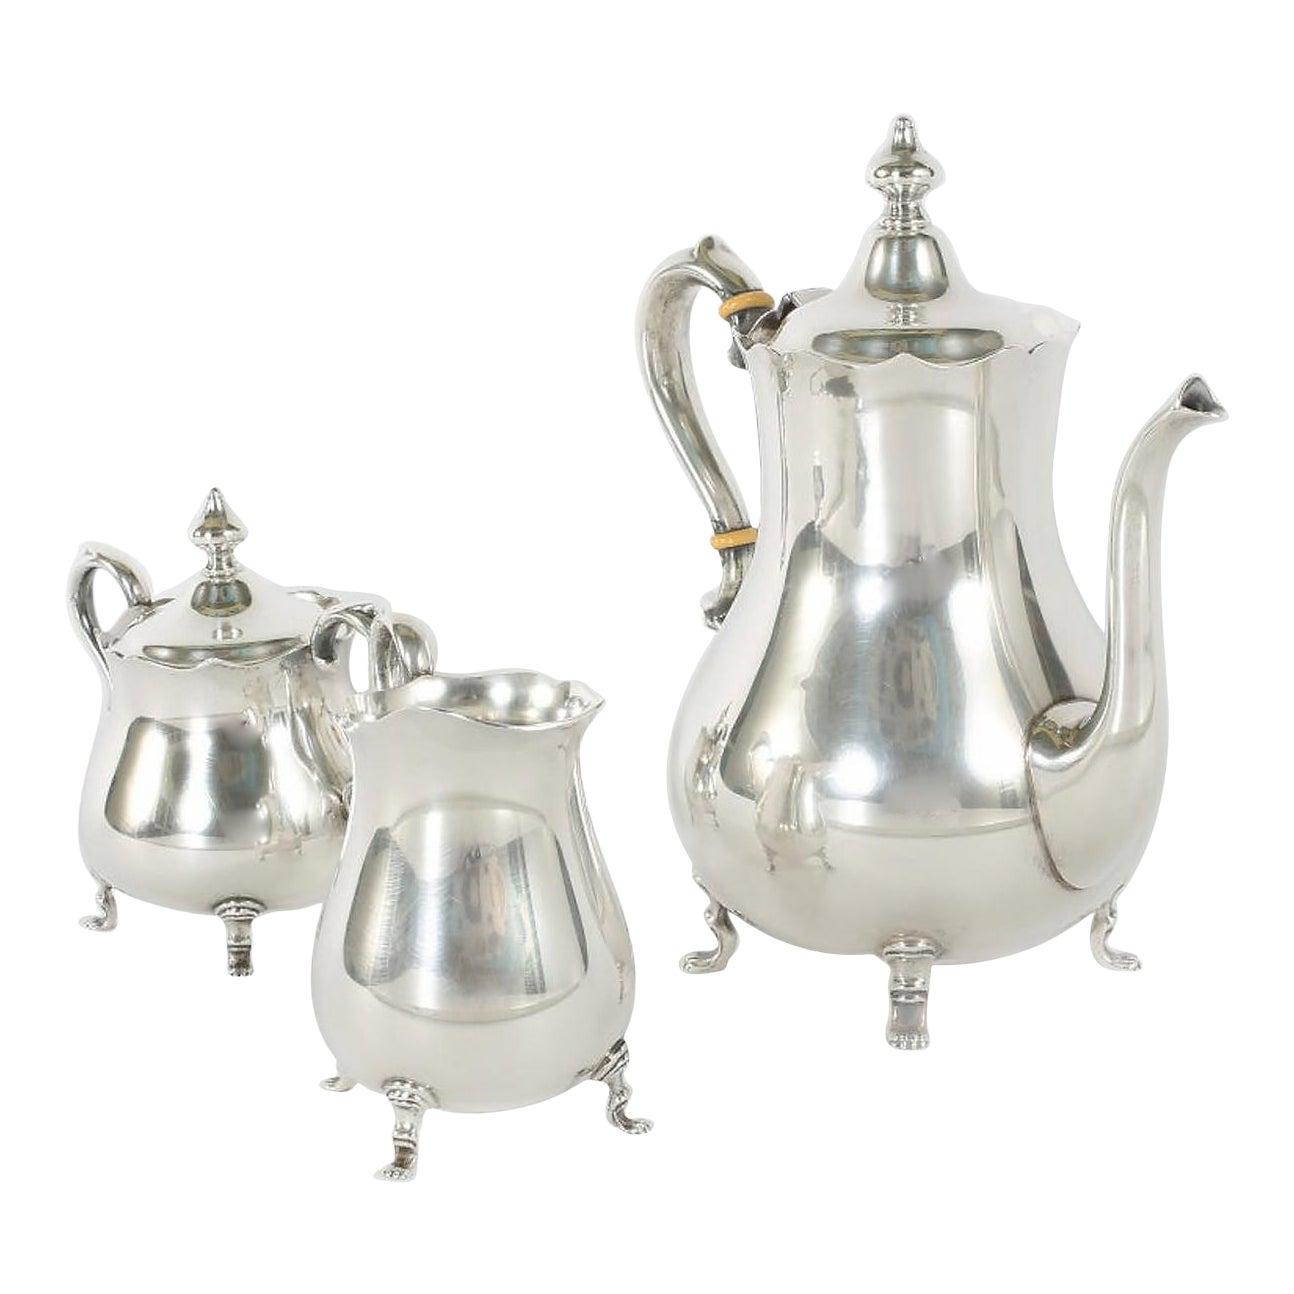 Cartier Sterling Silver Tea / Coffee Service, Set of 3 2